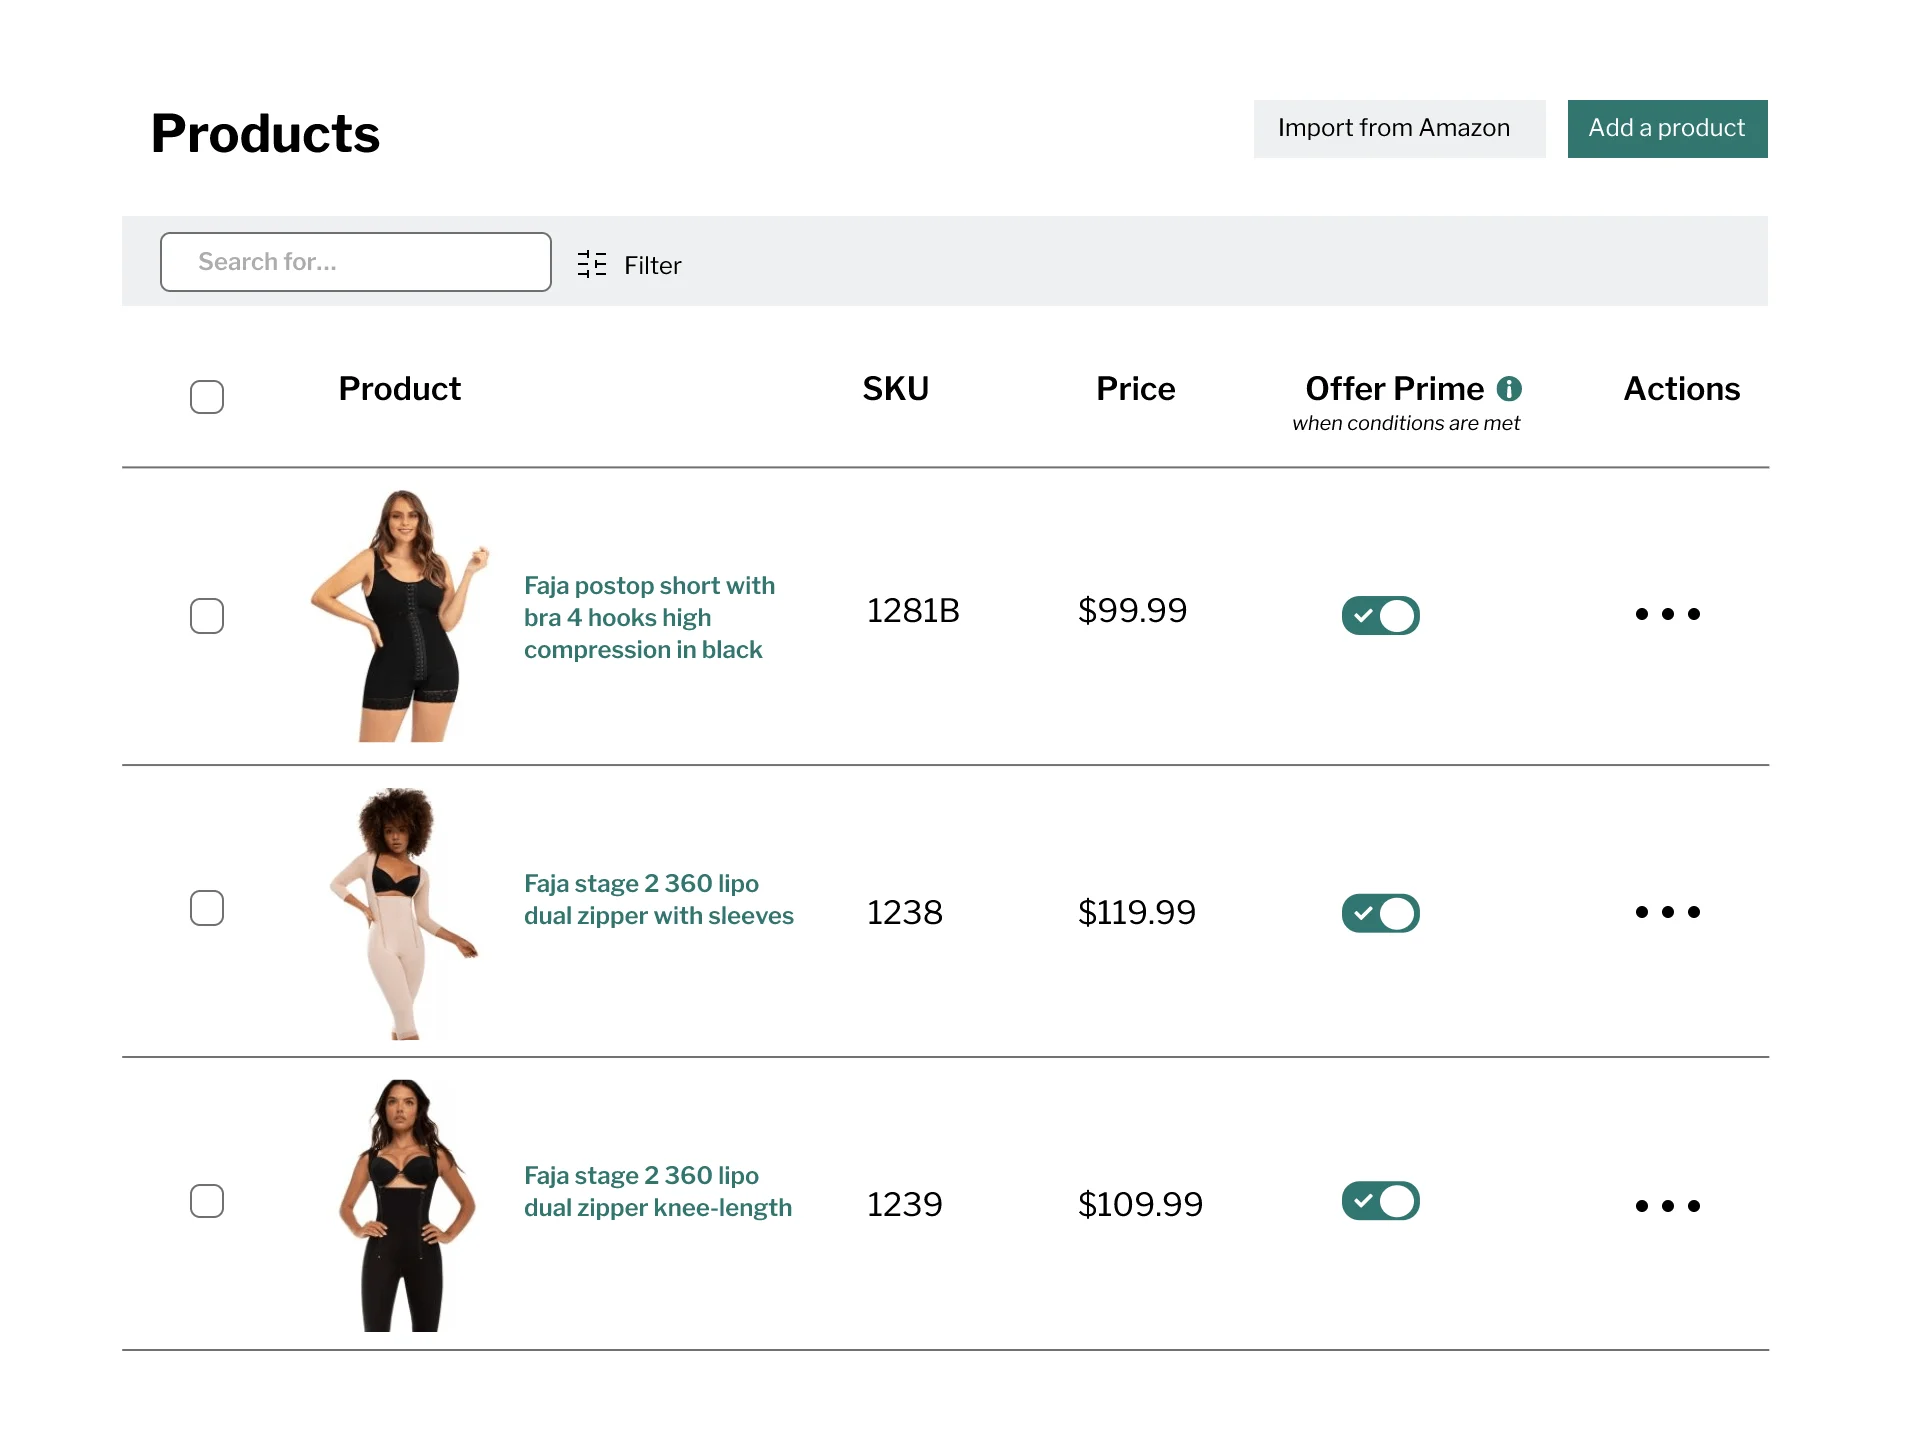 A screenshot of ecommerce listings with product details and options to import from amazon or add a product